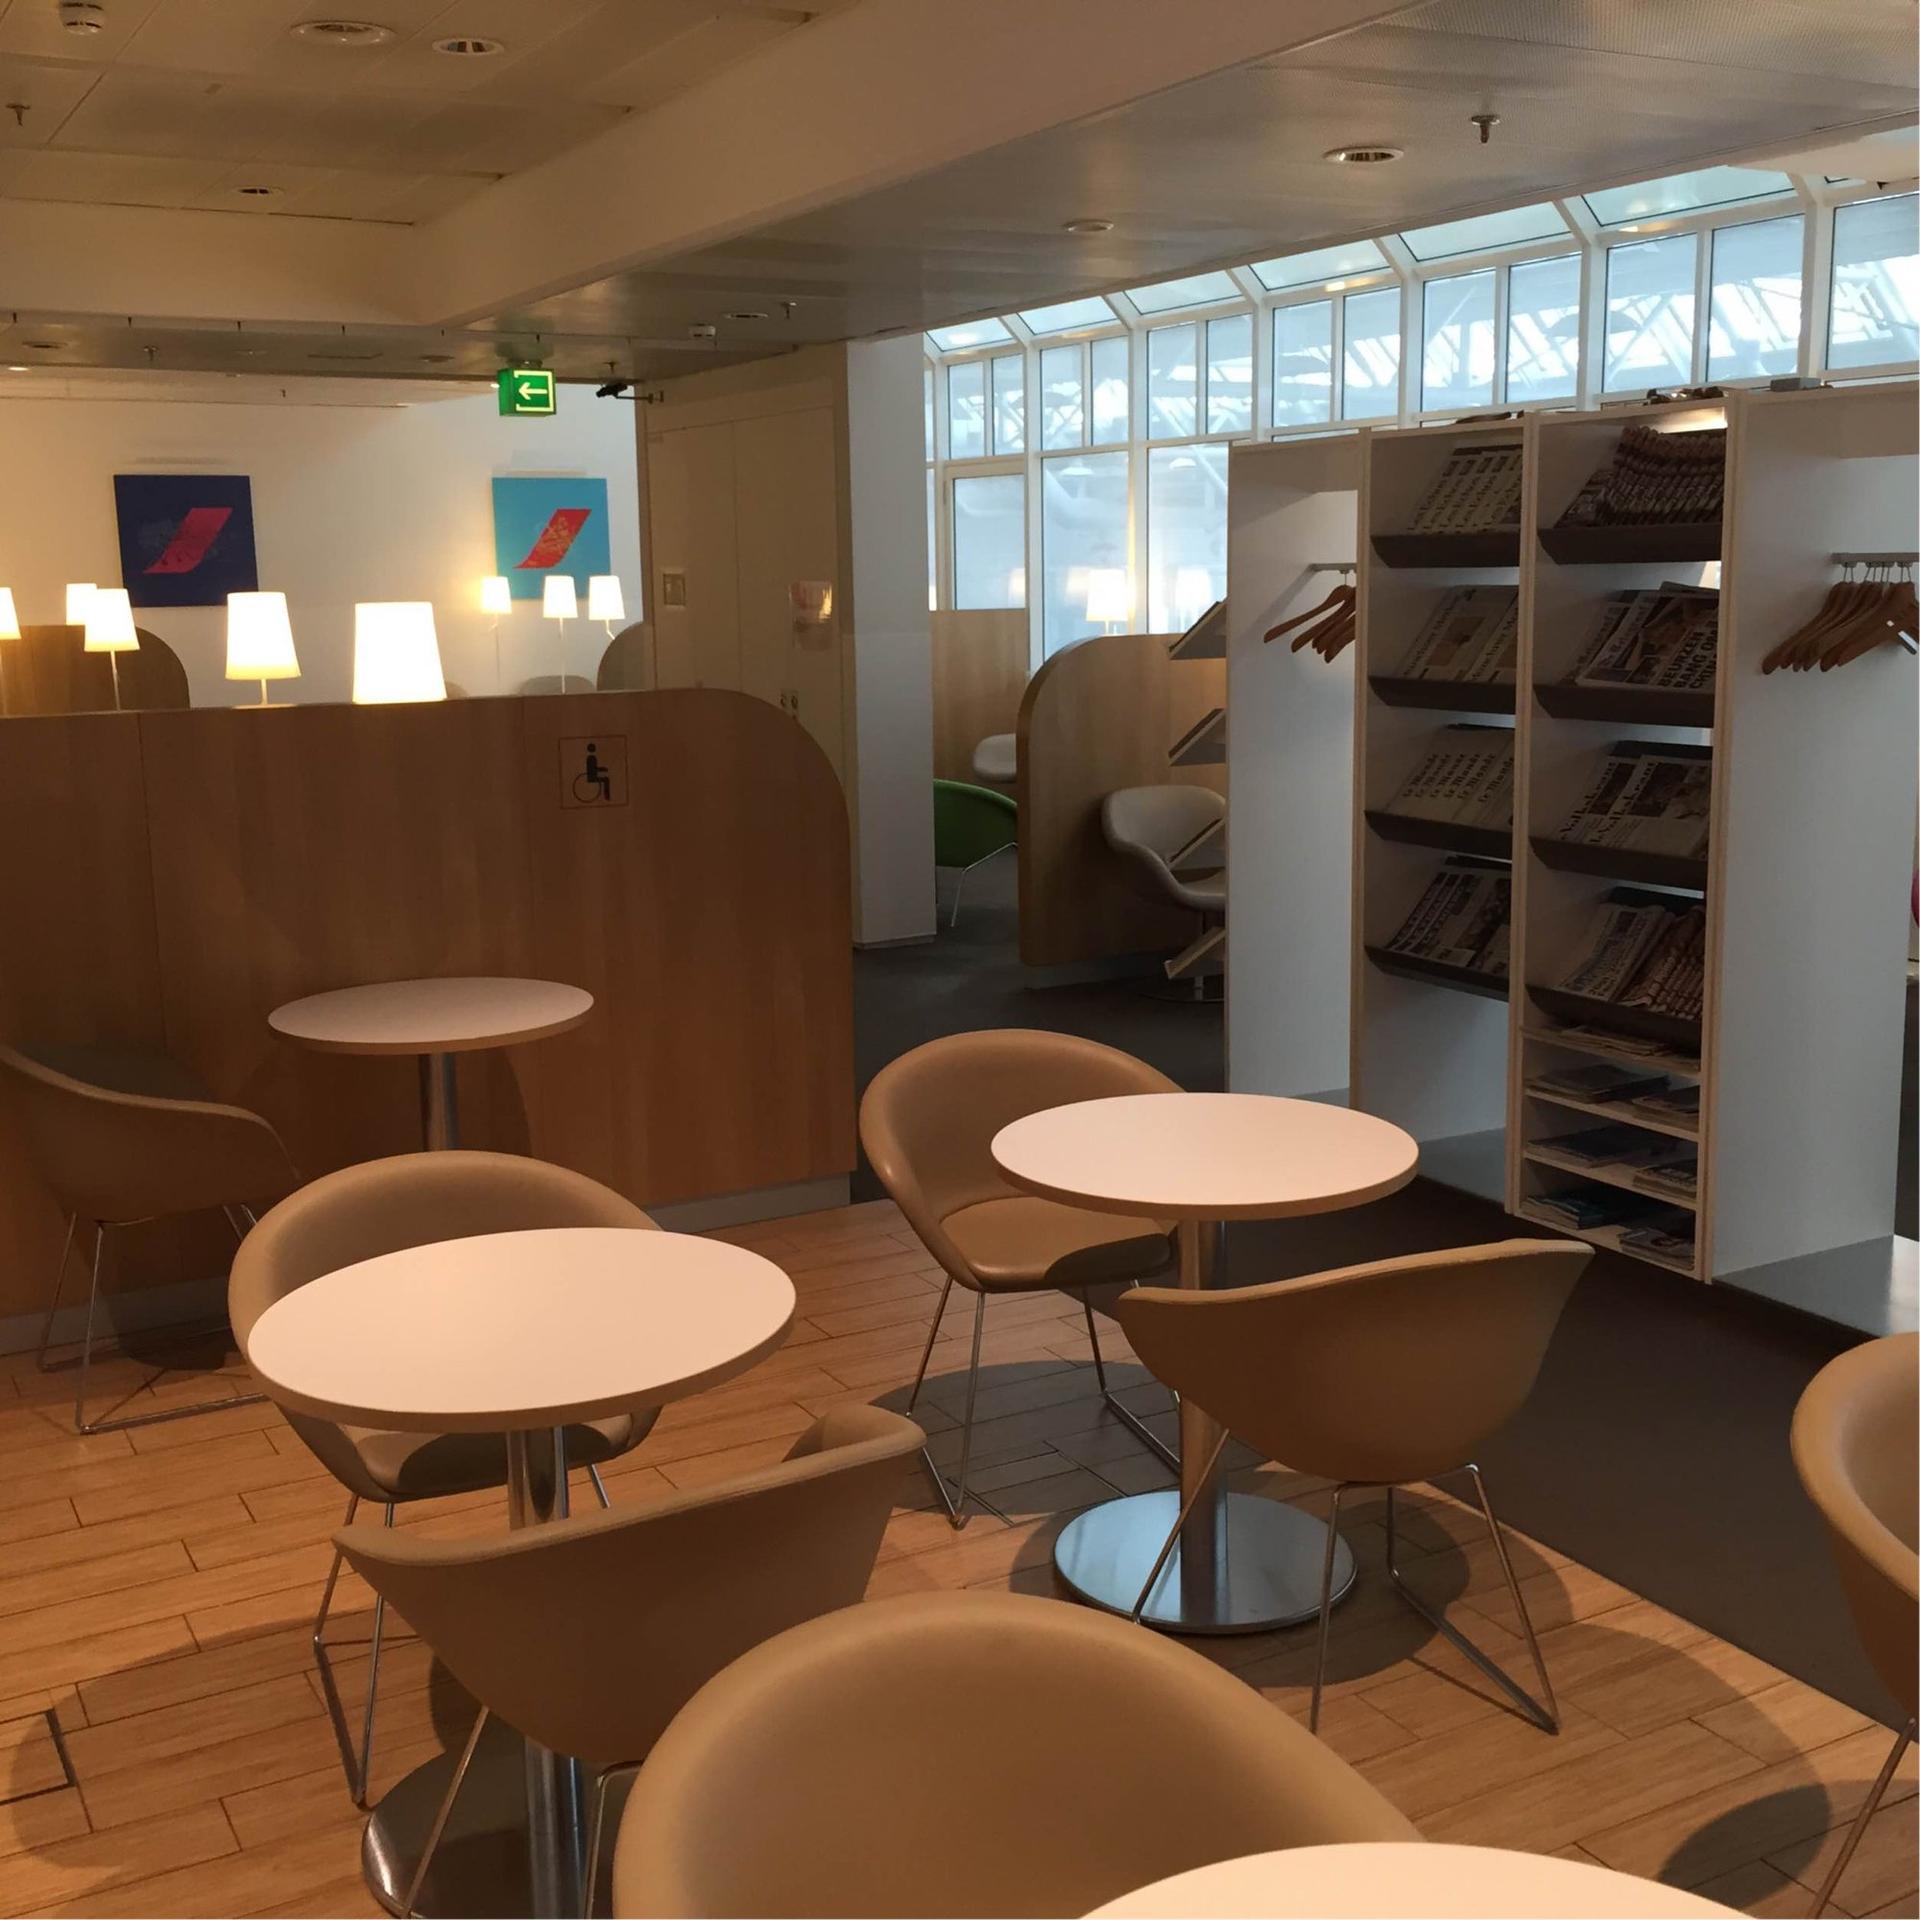 Air France Lounge image 3 of 3